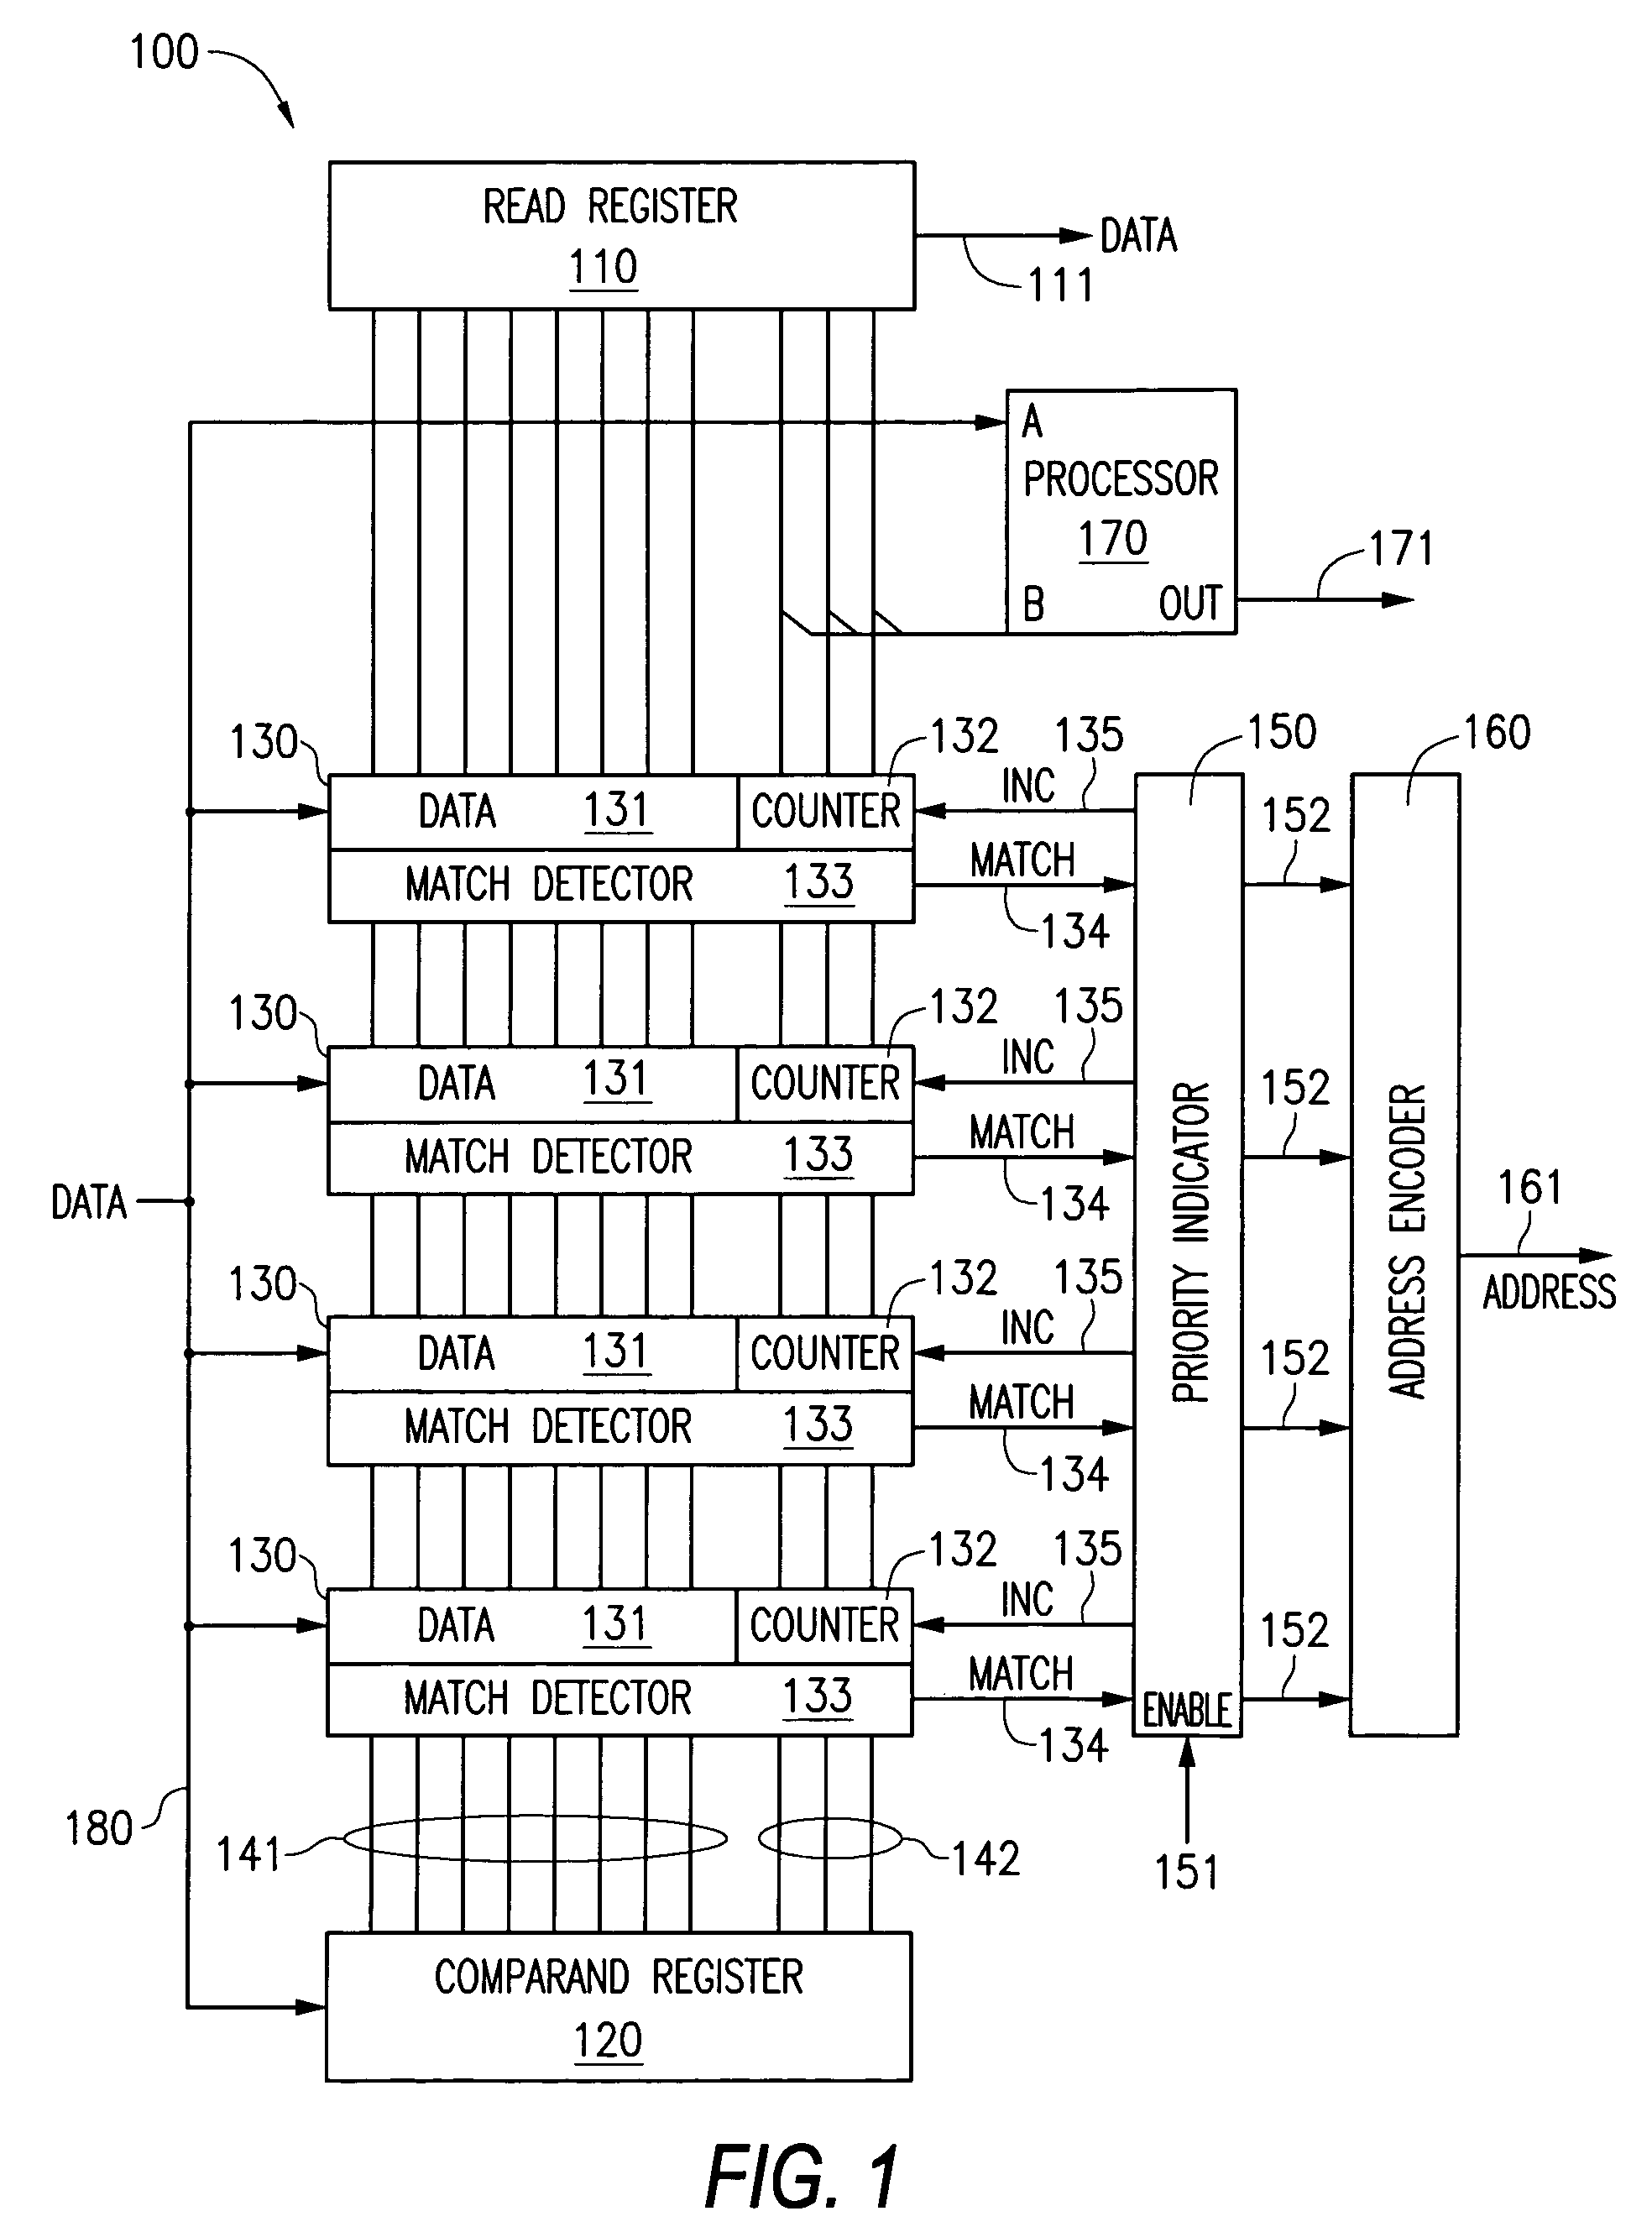 CAM modified to be used for statistic calculation in network switches and routers